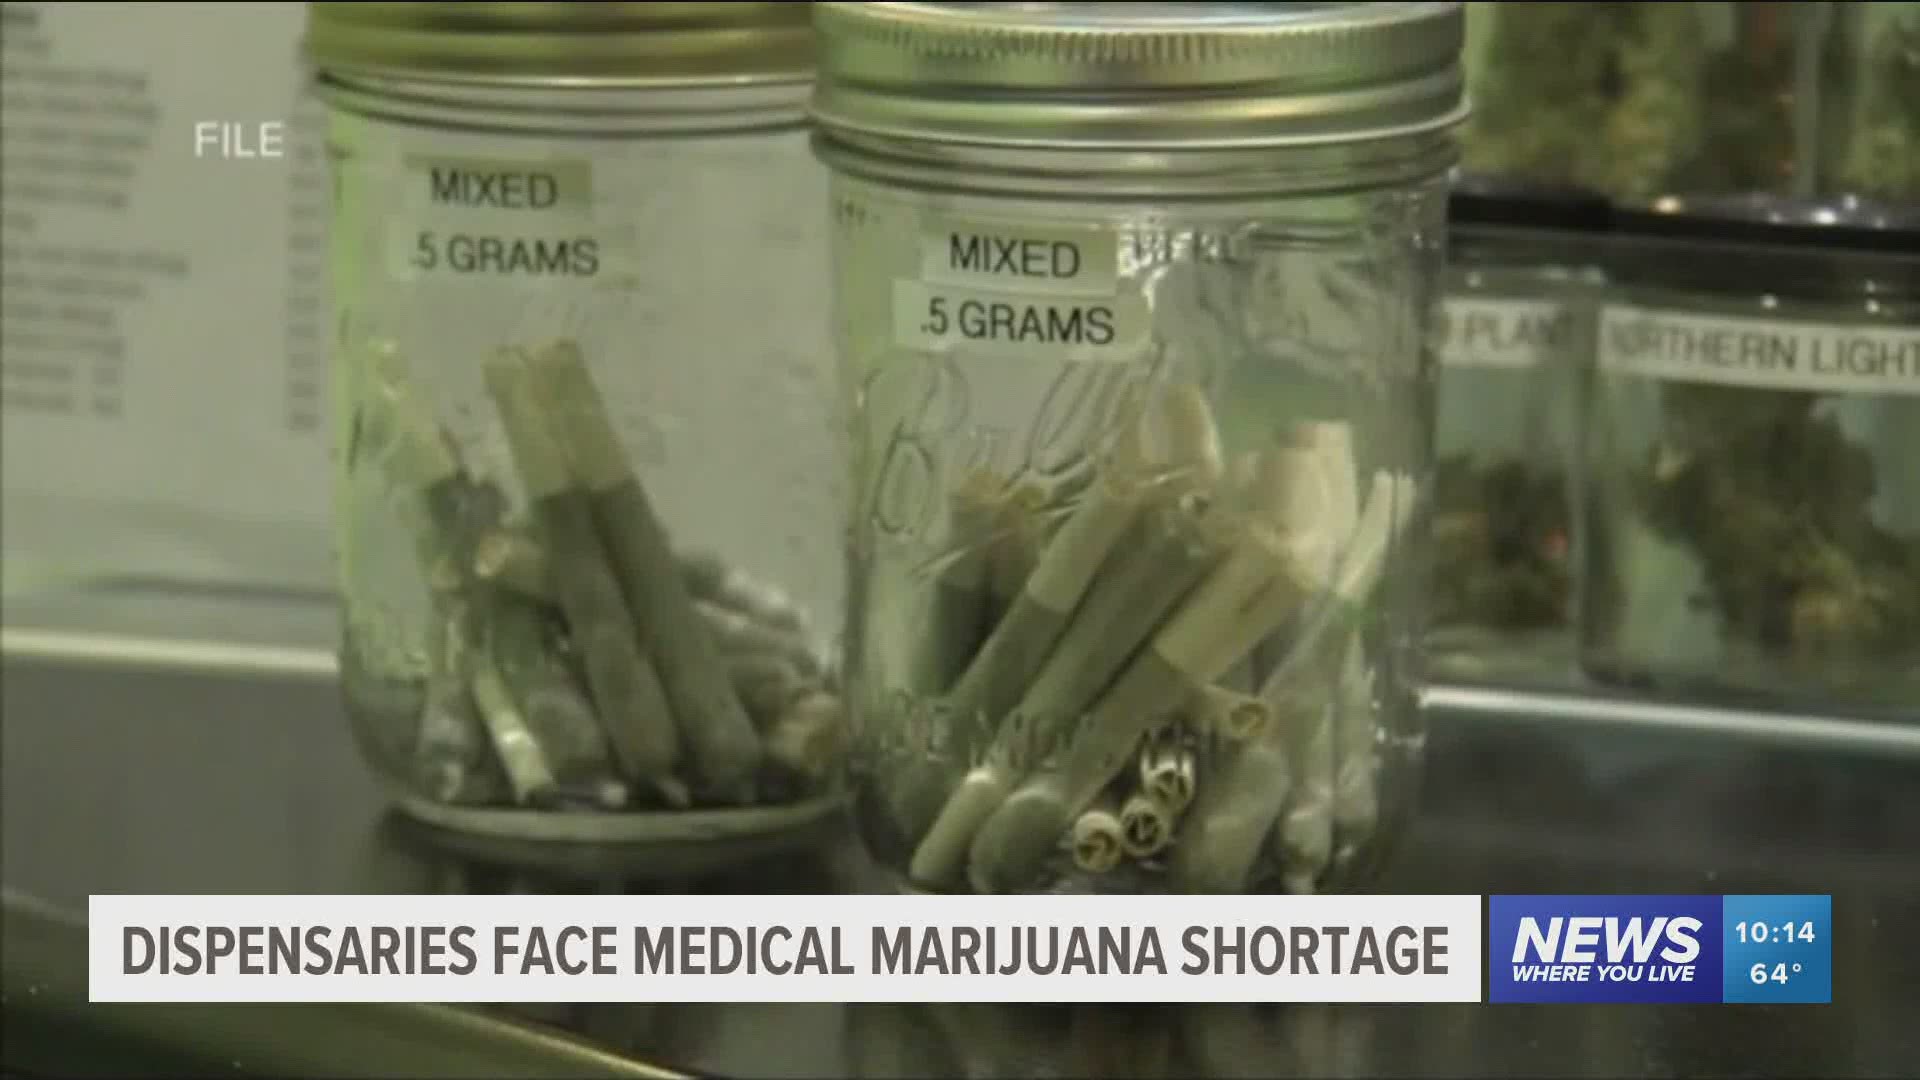 Patients are struggling to find medical marijuana in Arkansas during the coronavirus pandemic. https://bit.ly/3iRIevK